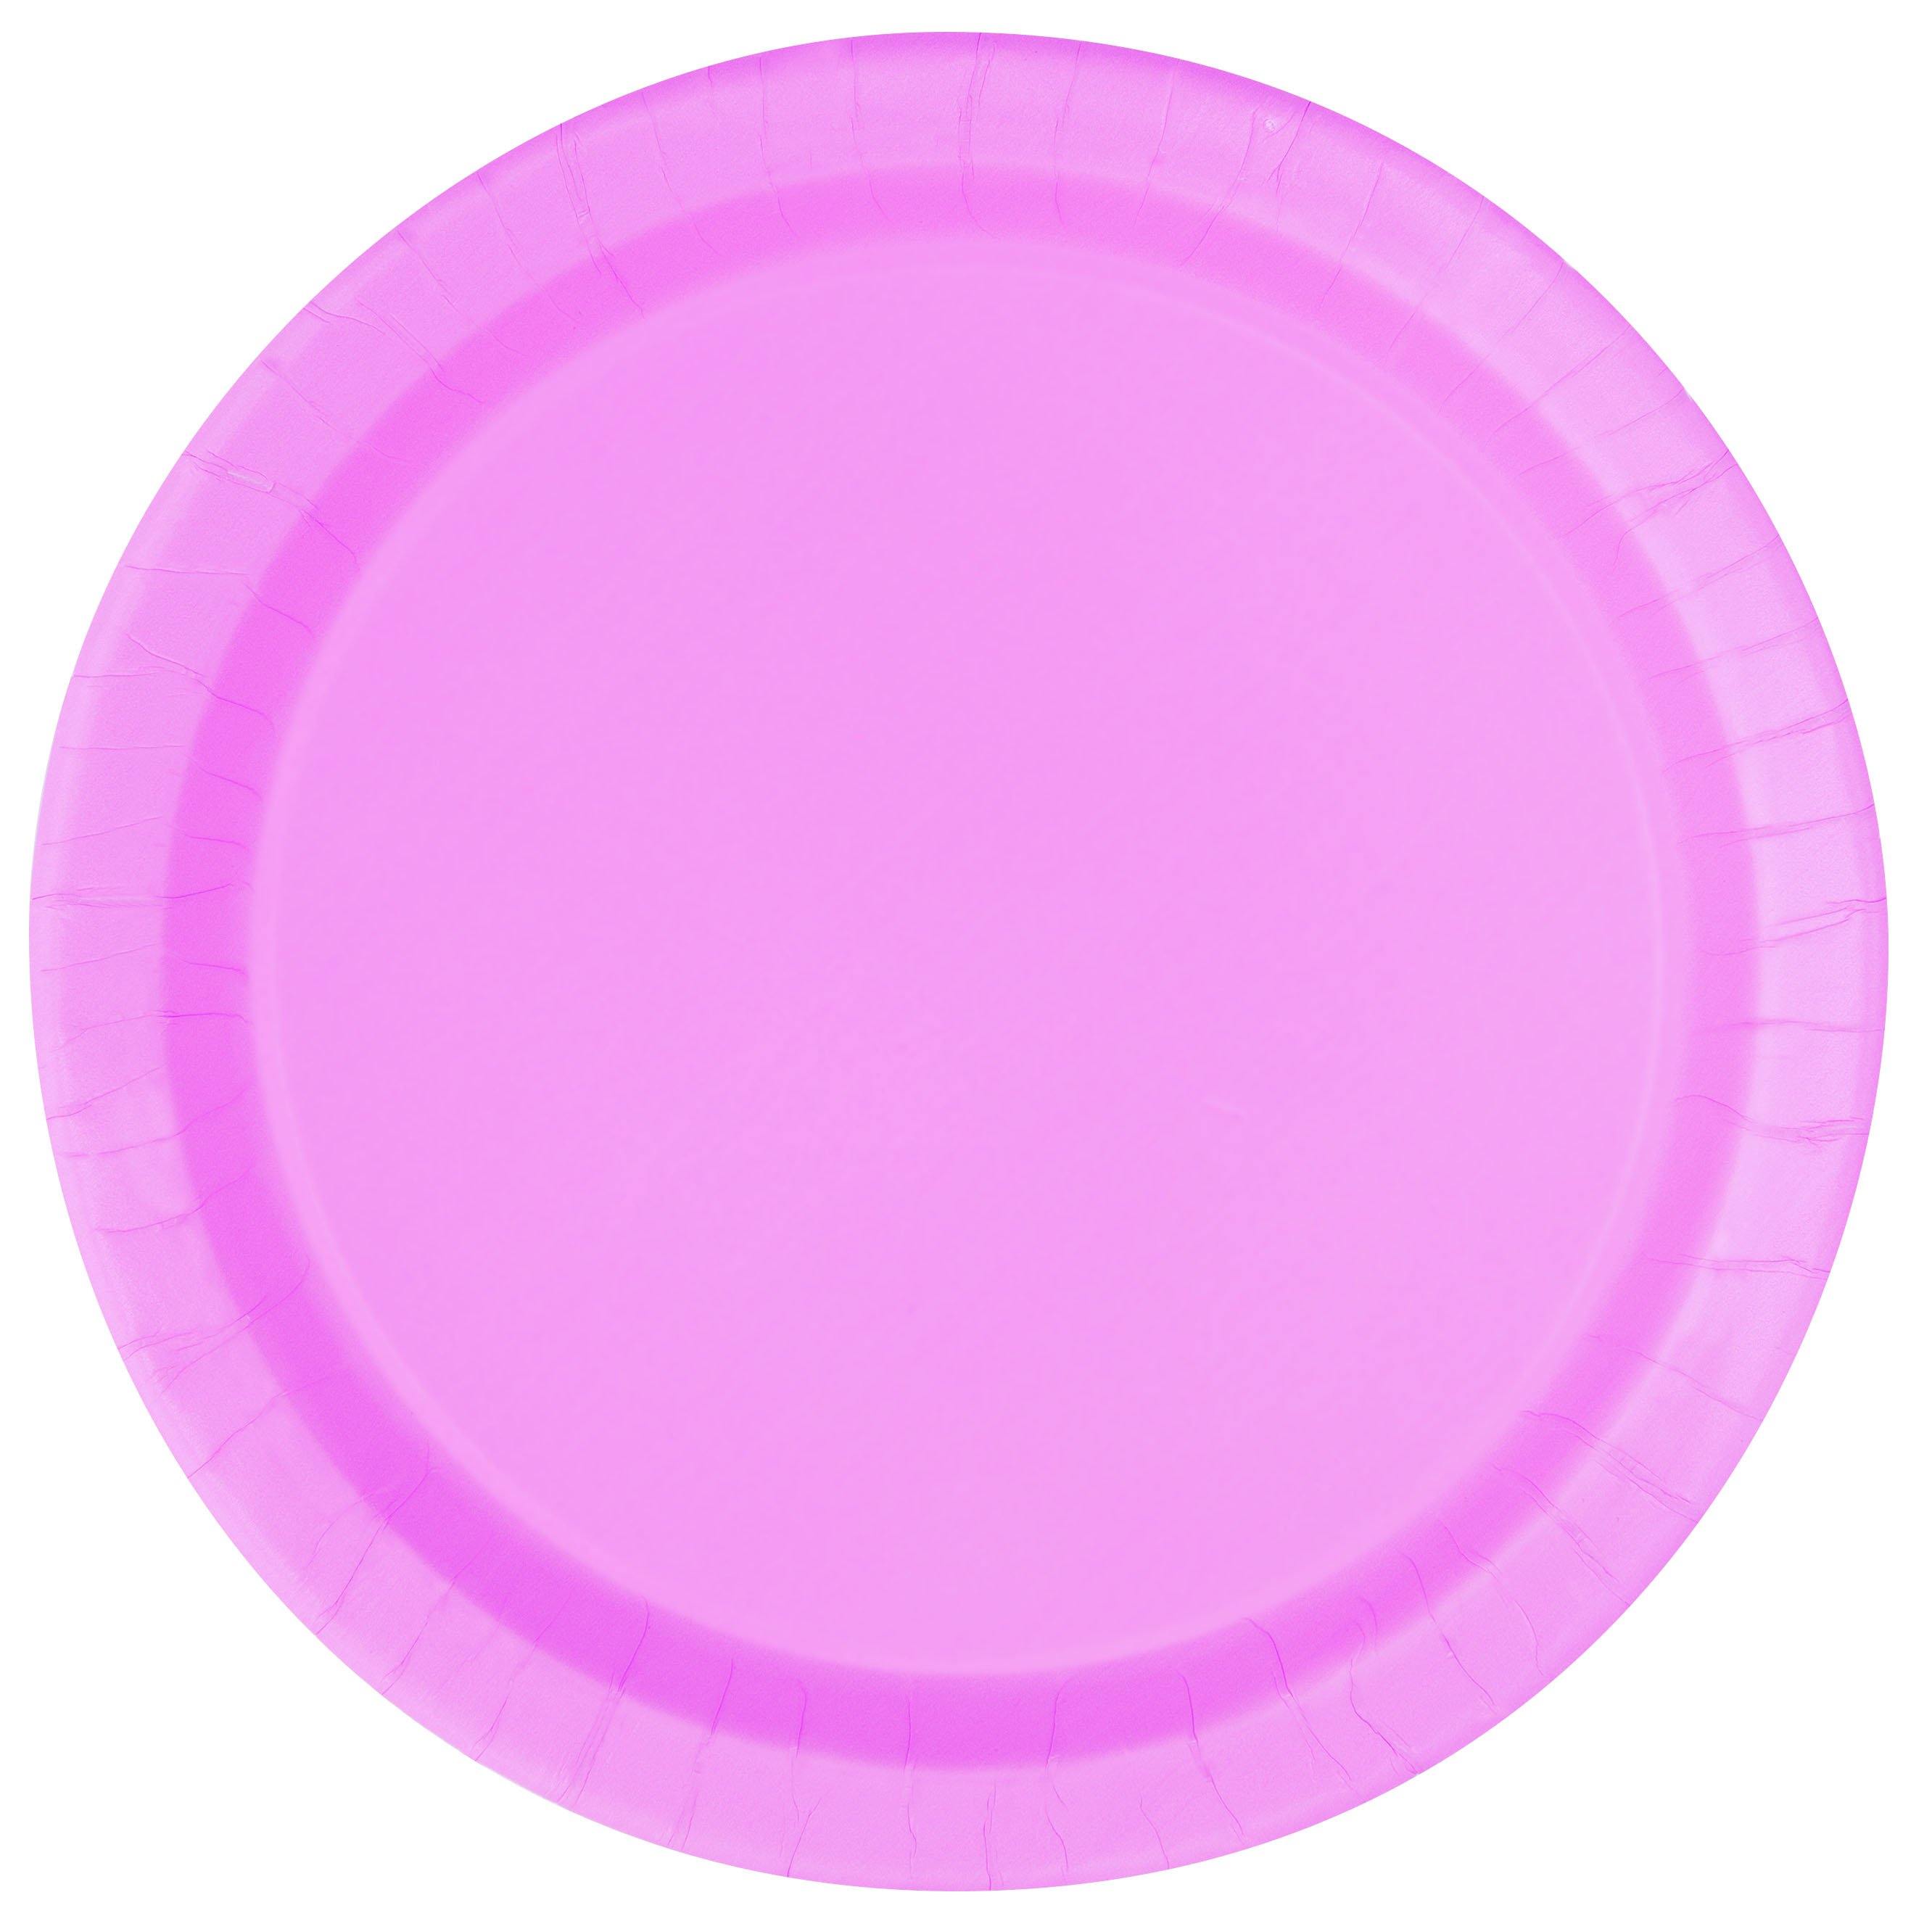 8 Pack Lovely Pink Paper Plates - 23cm - The Base Warehouse